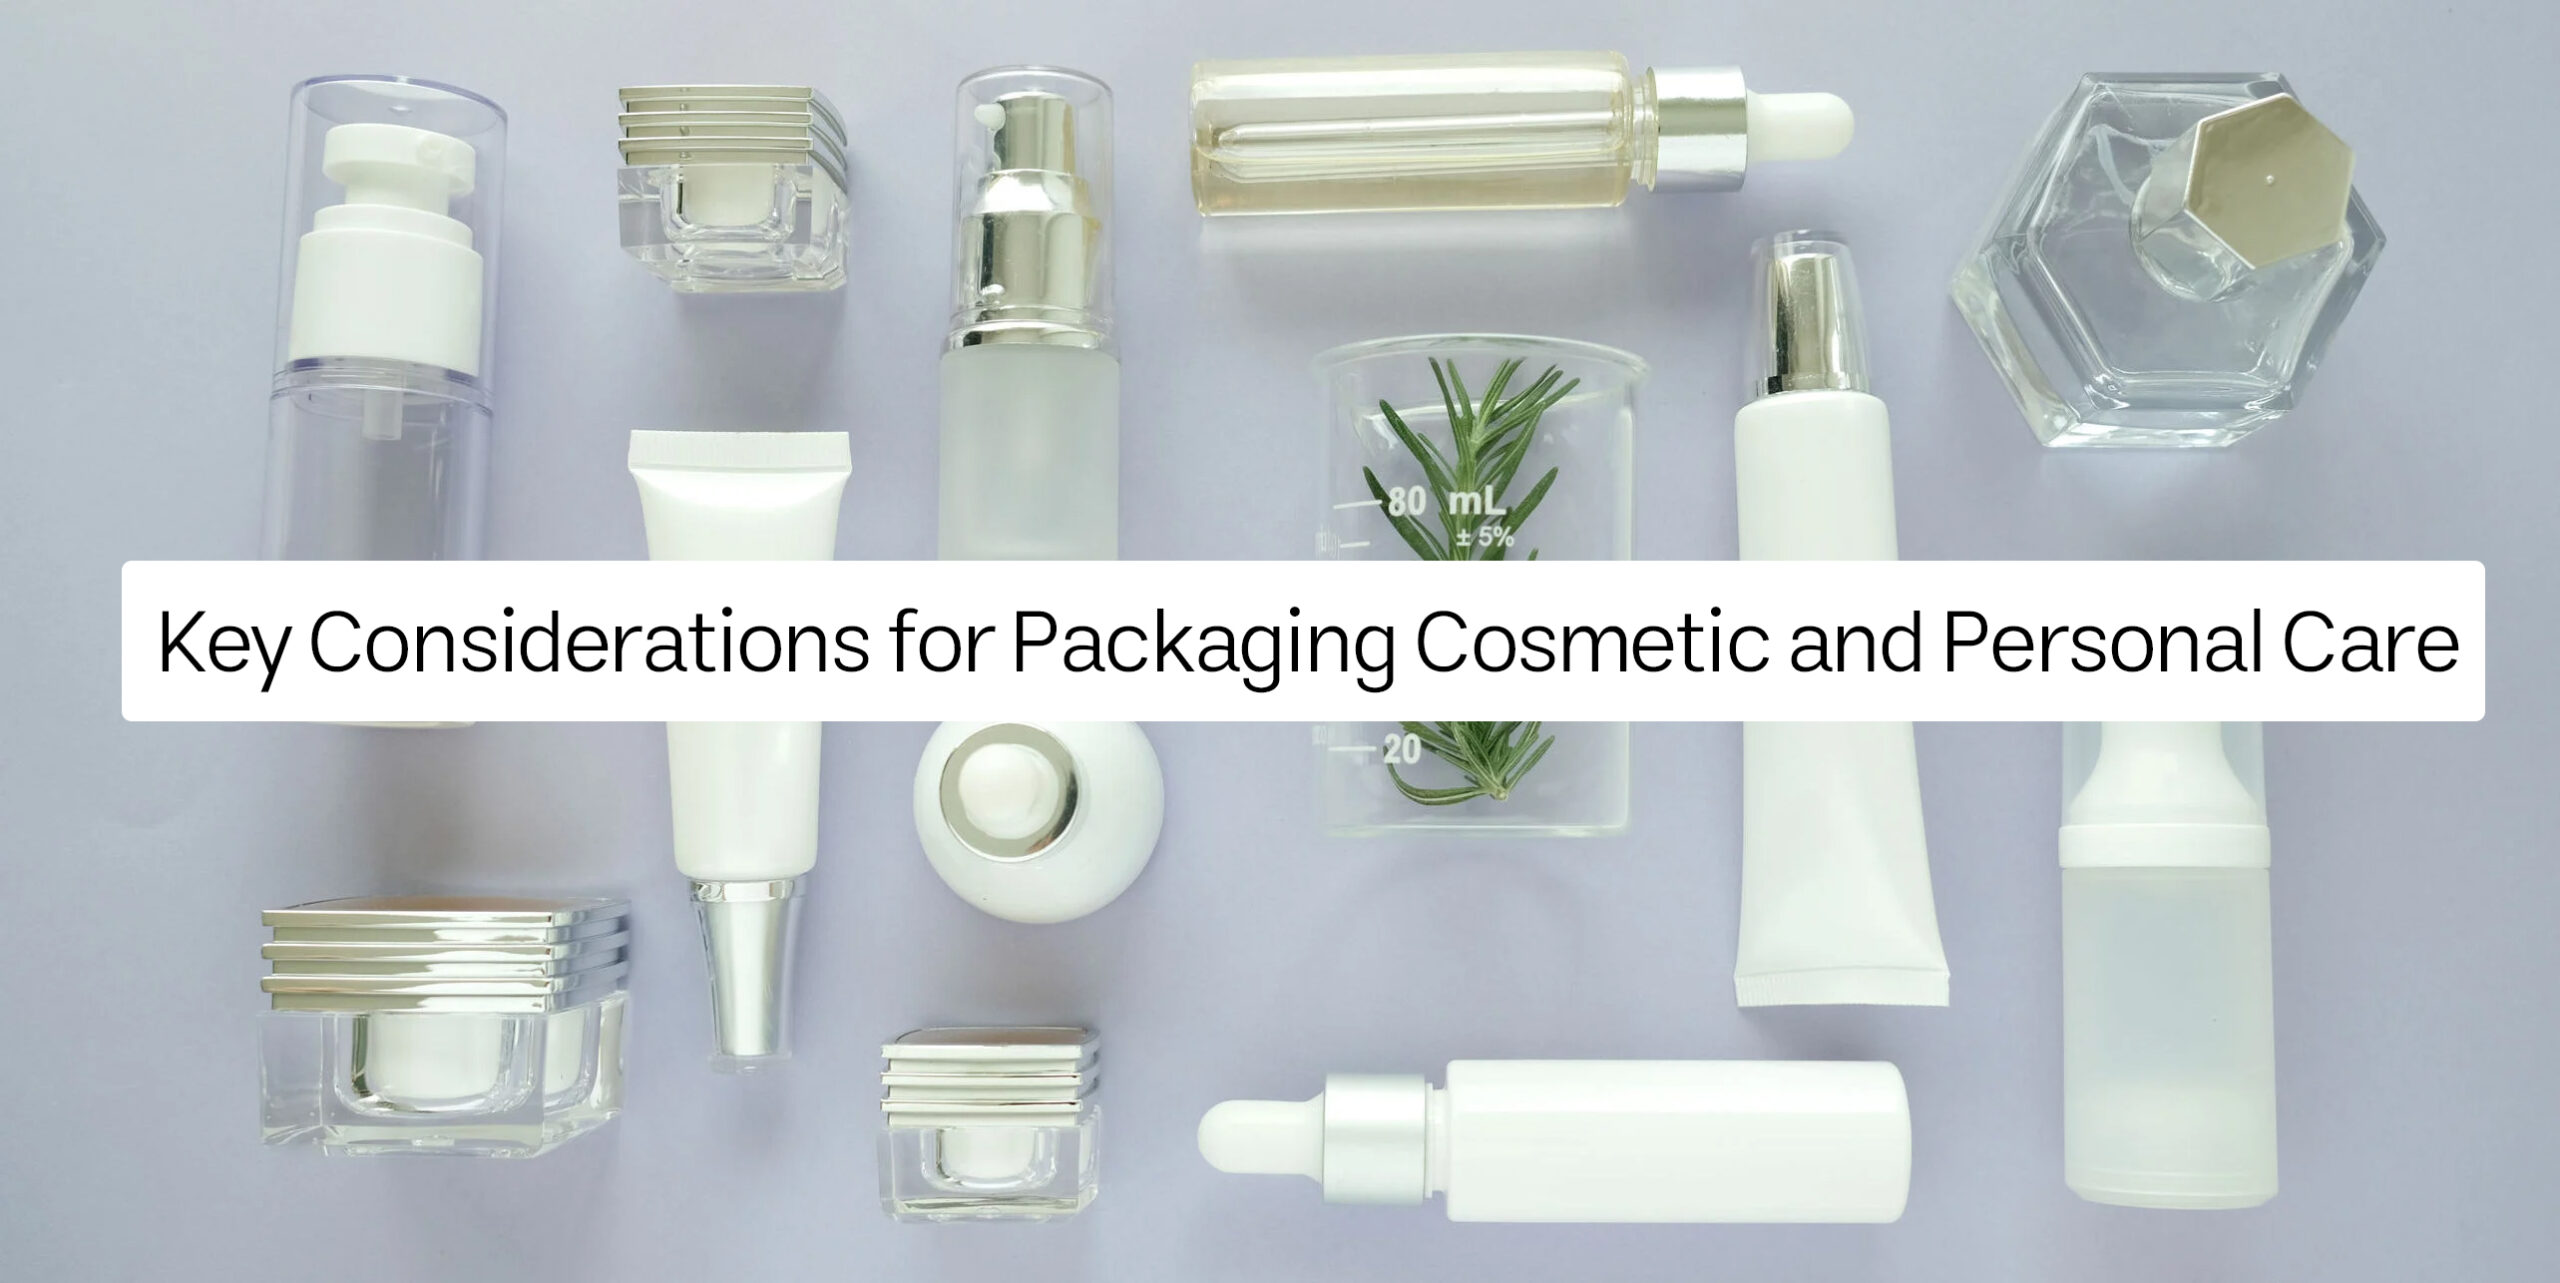 Key Considerations for Packaging Cosmetic and Personal Care